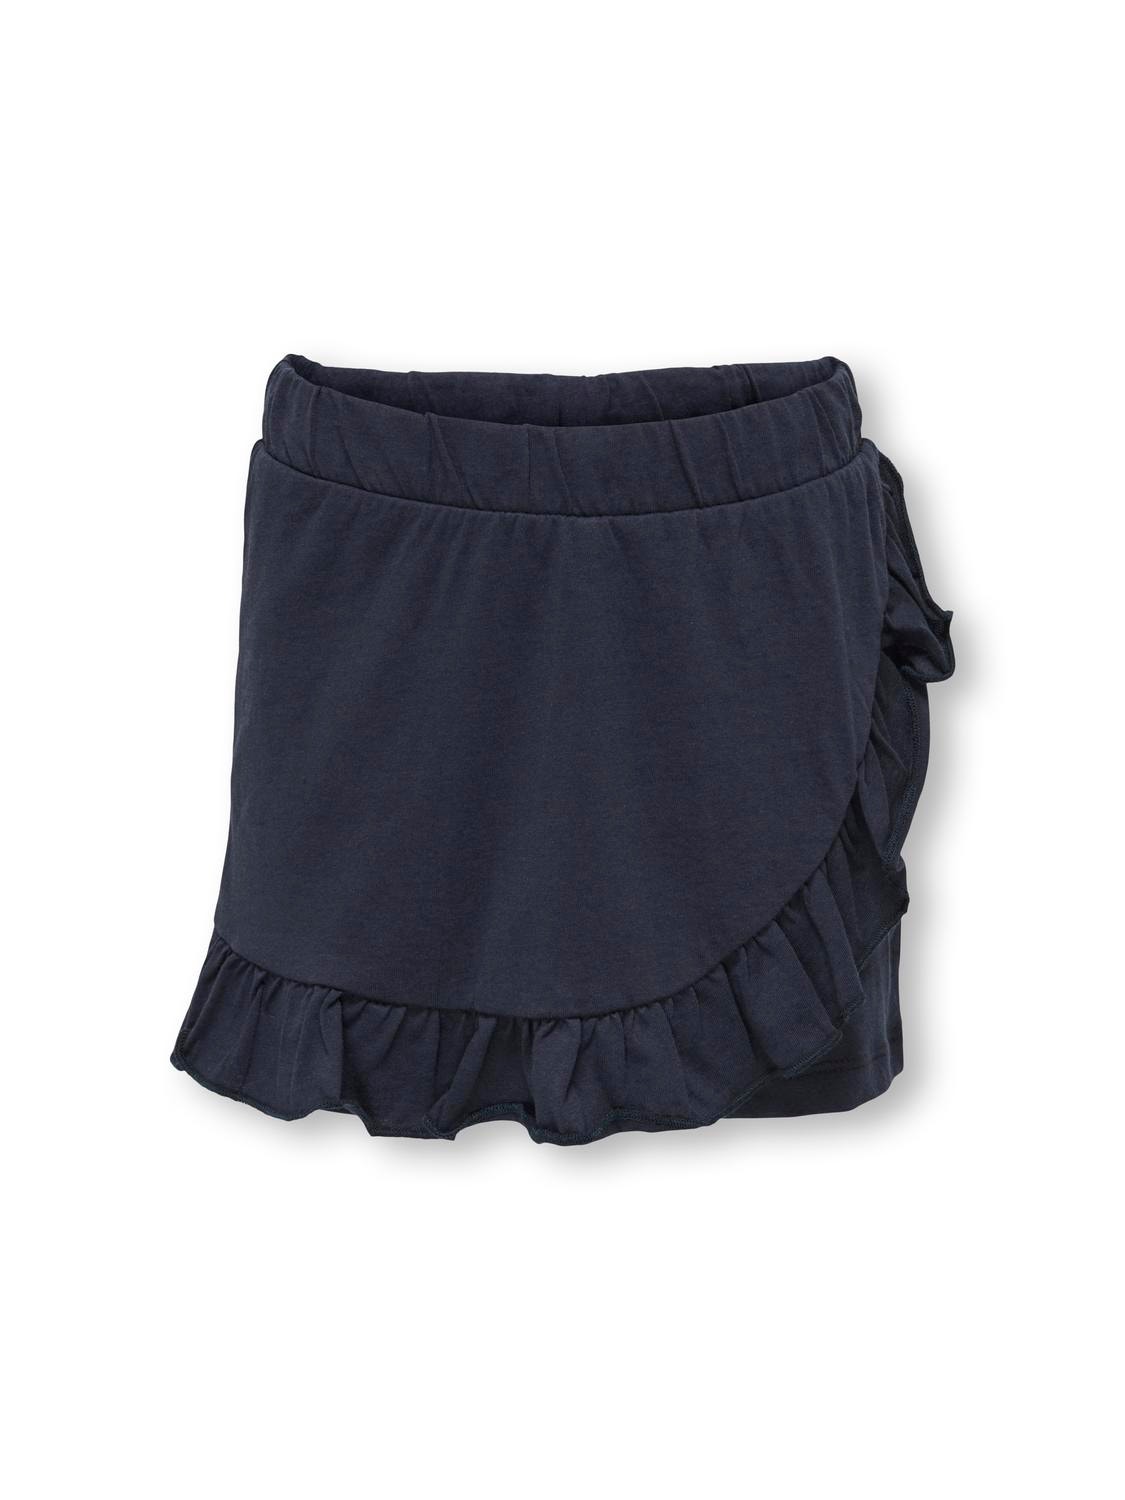 ONLY Normal passform Shorts -Night Sky - 15295263